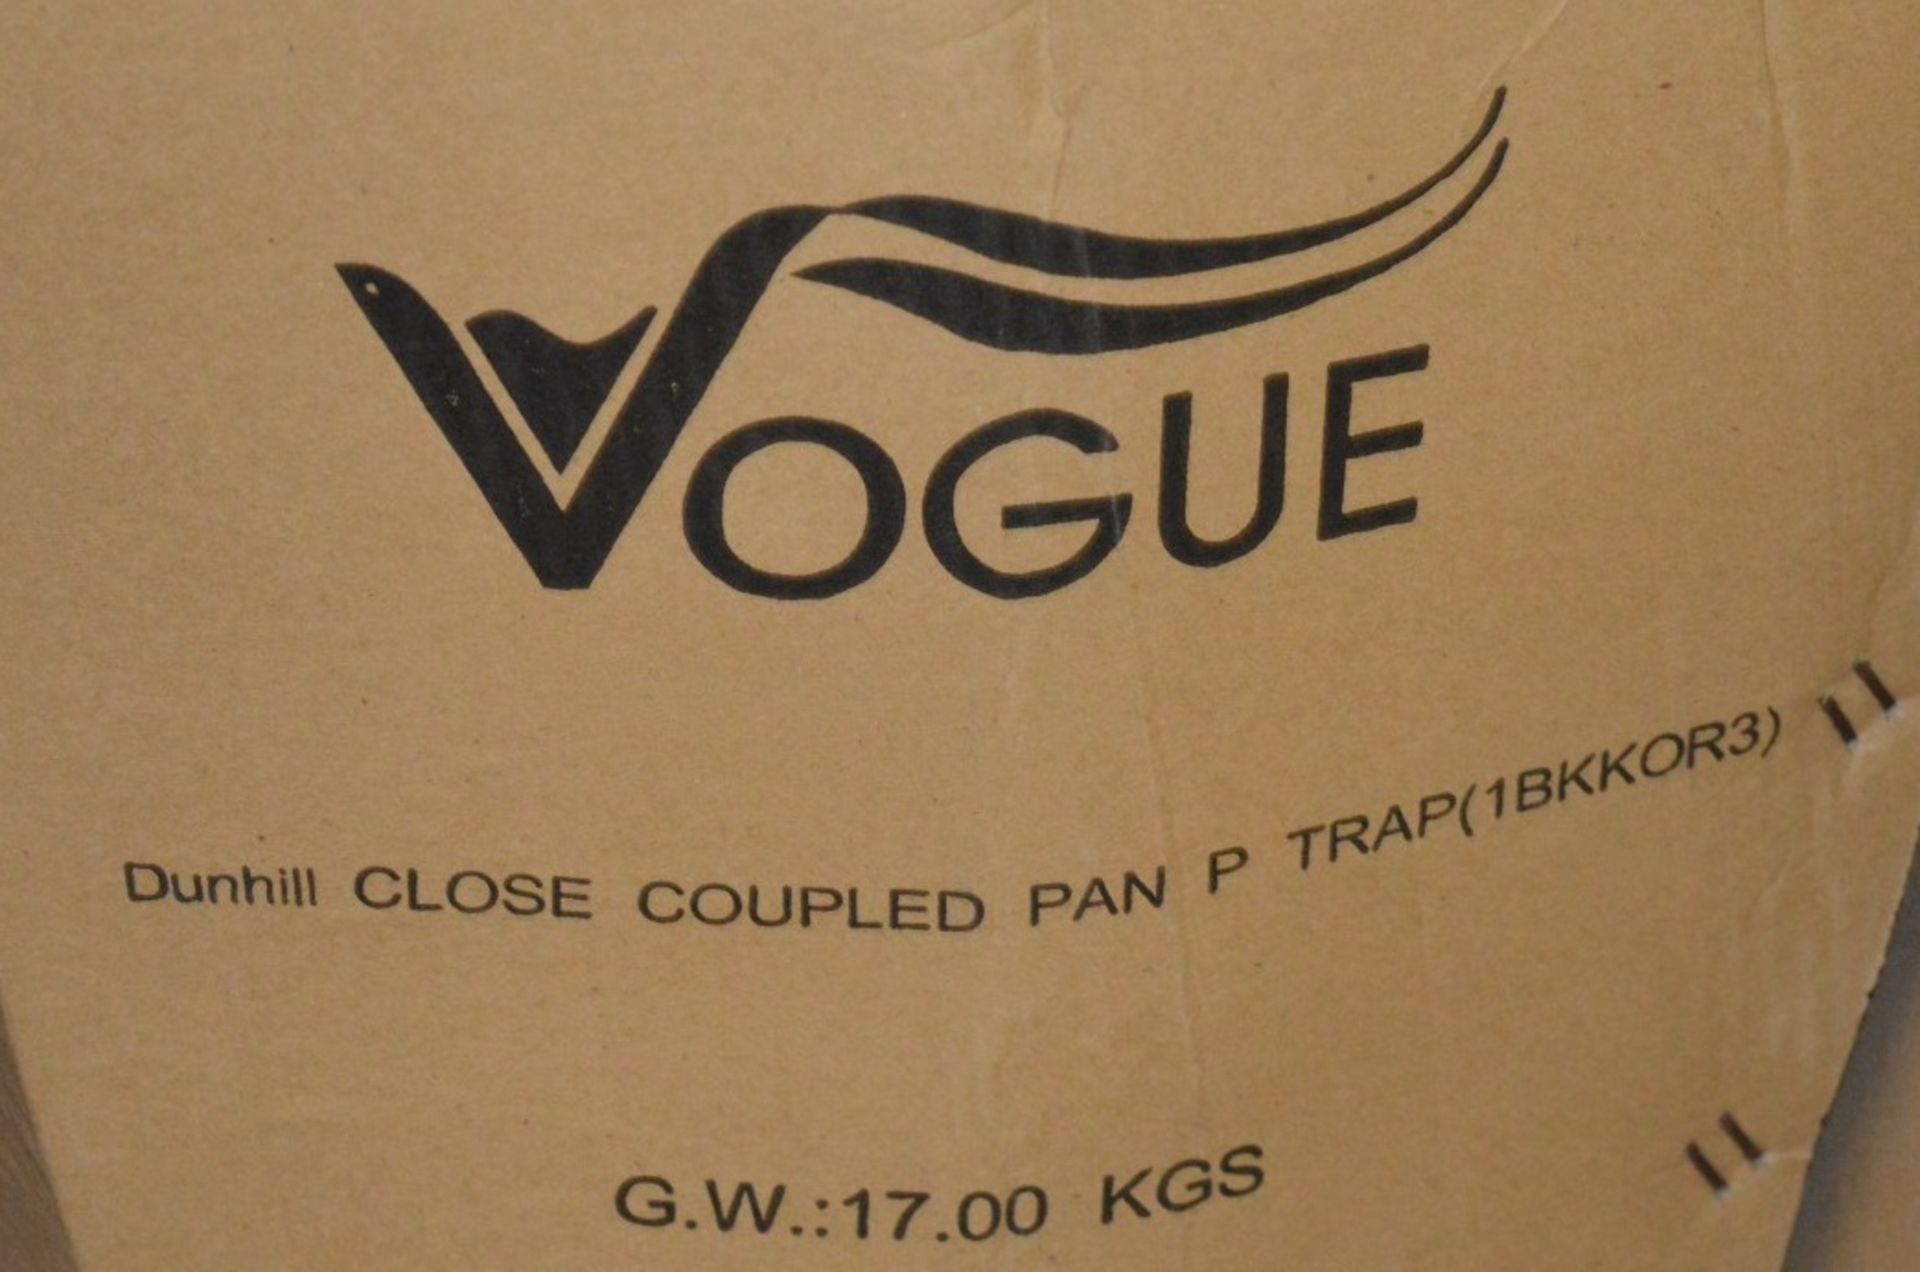 1 x Vogue Bathrooms DUNHILL Close Coupled Toilet Pan - P Trap - Brand New and Boxed - Seat Not - Image 2 of 2